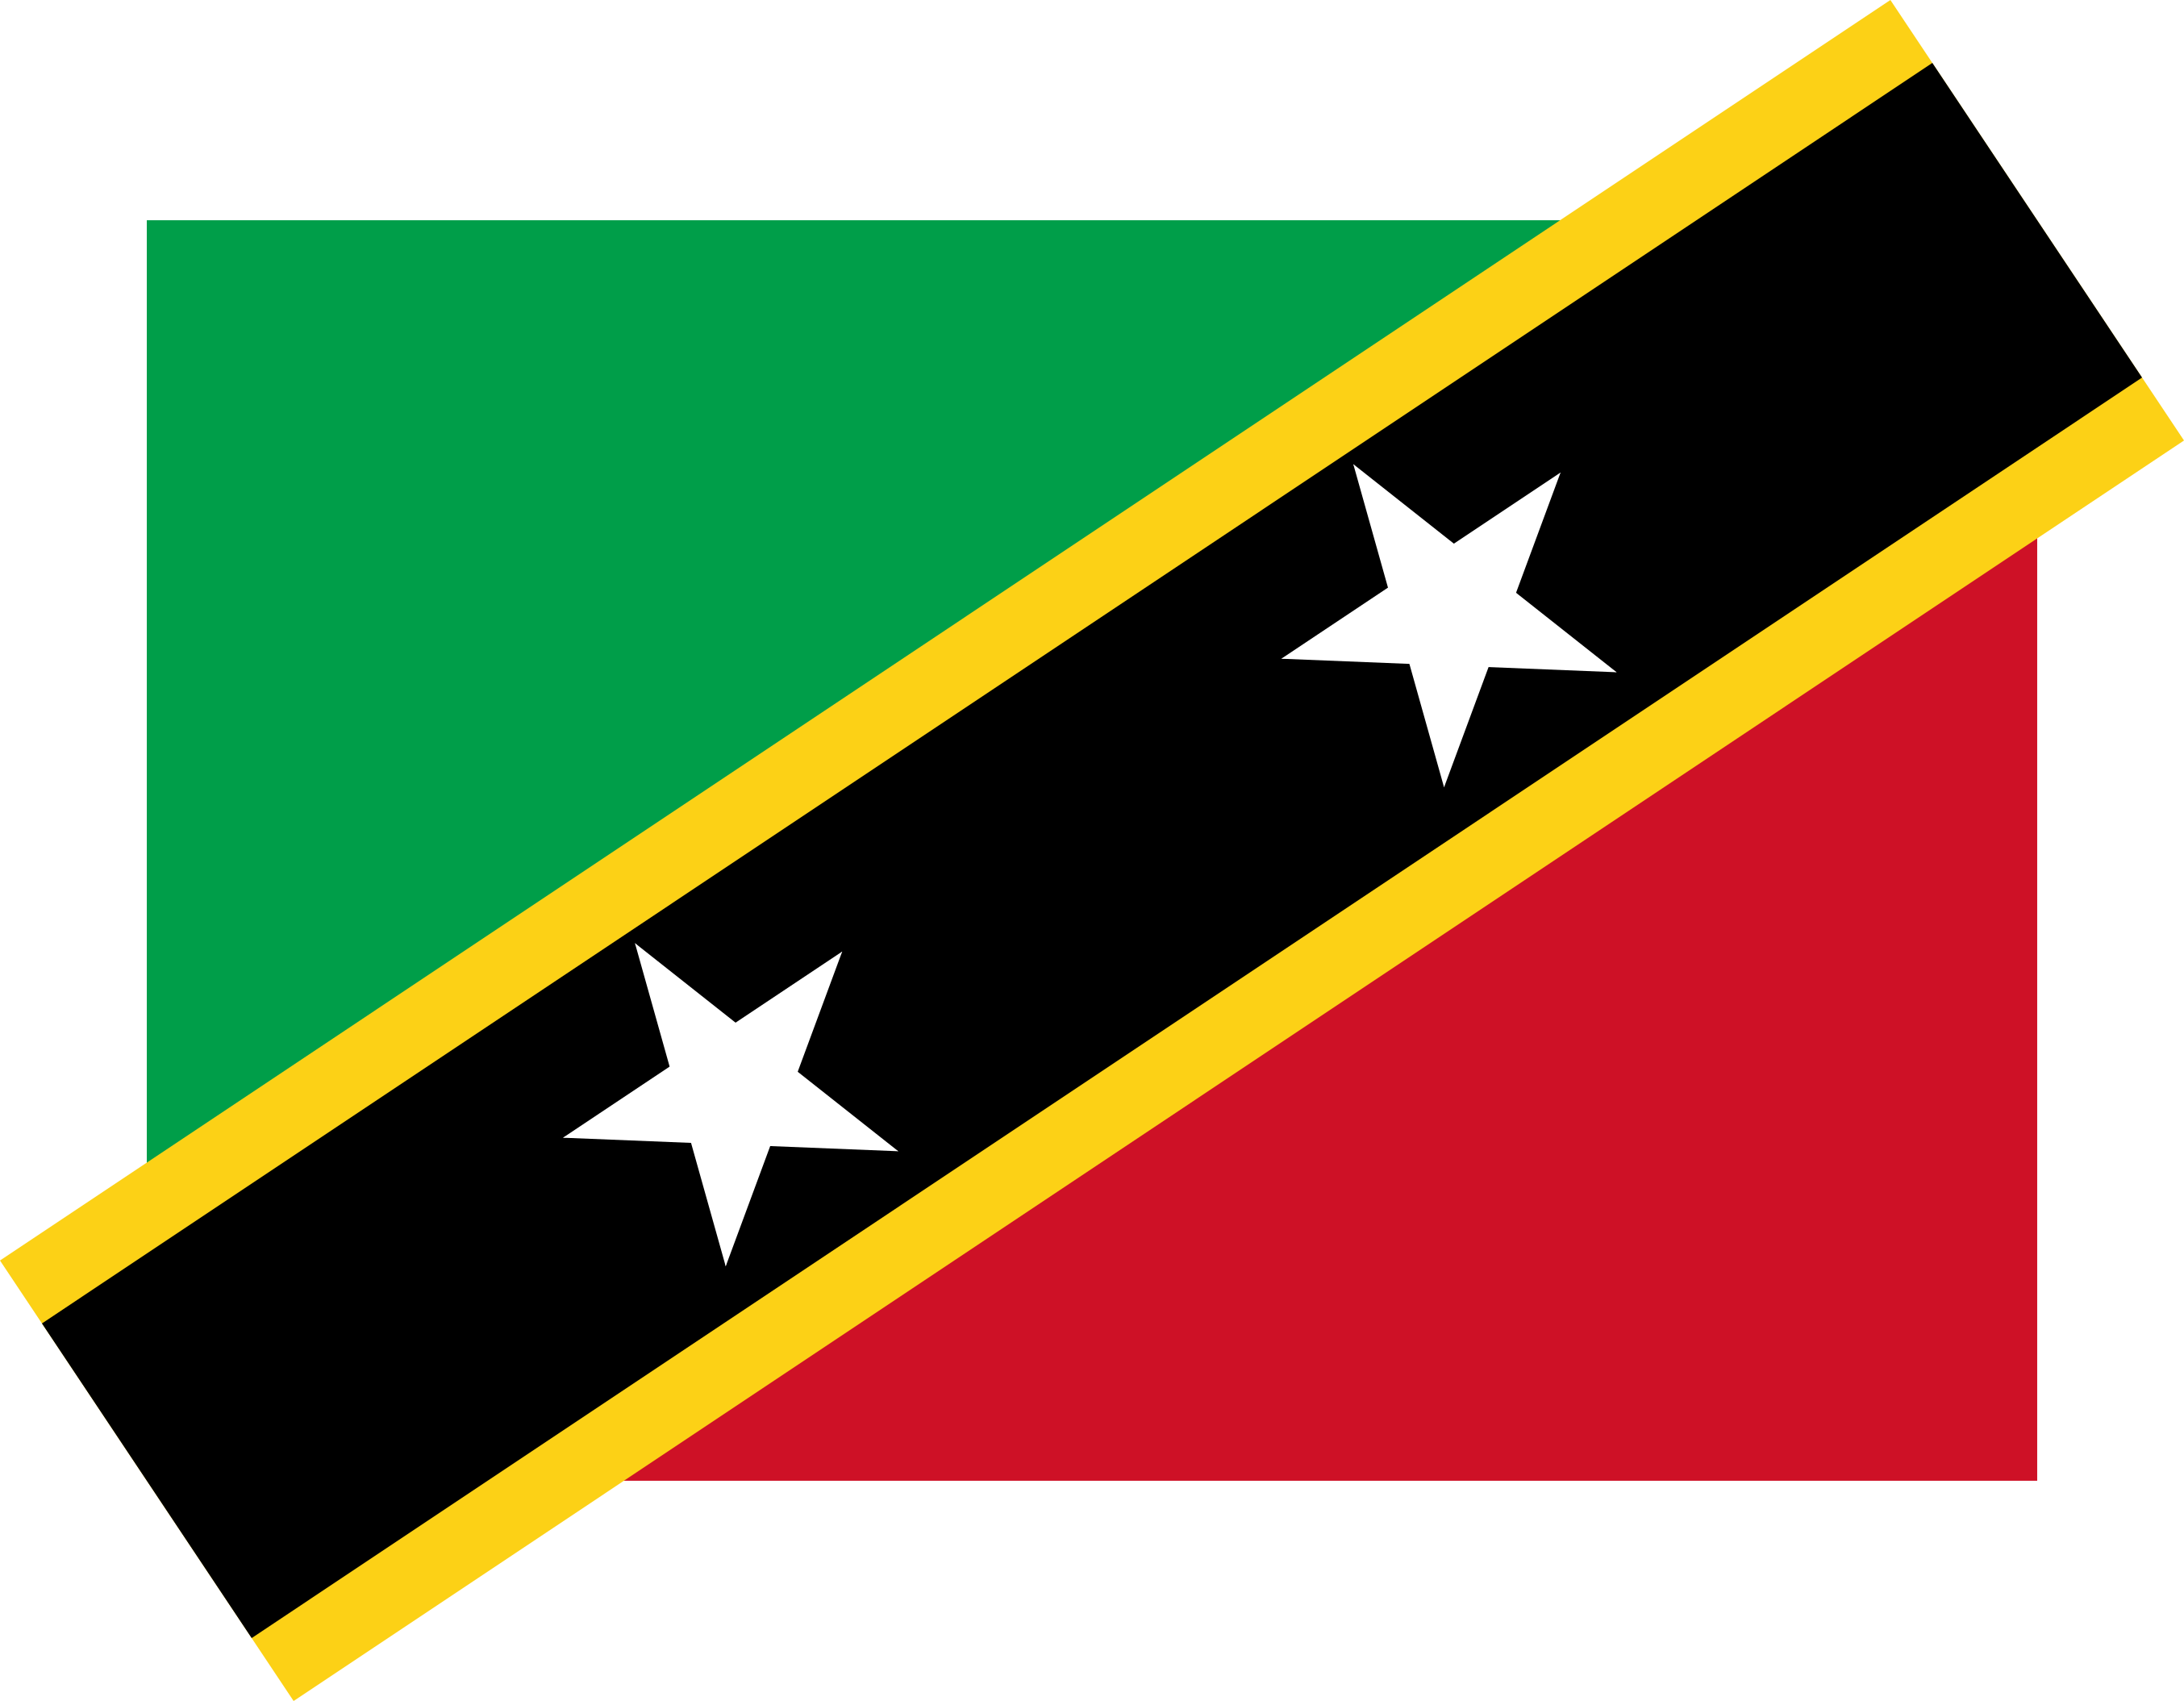 Free Saint Kitts and Nevis Flag Documents: PDF, DOC, DOCX, HTML & More!